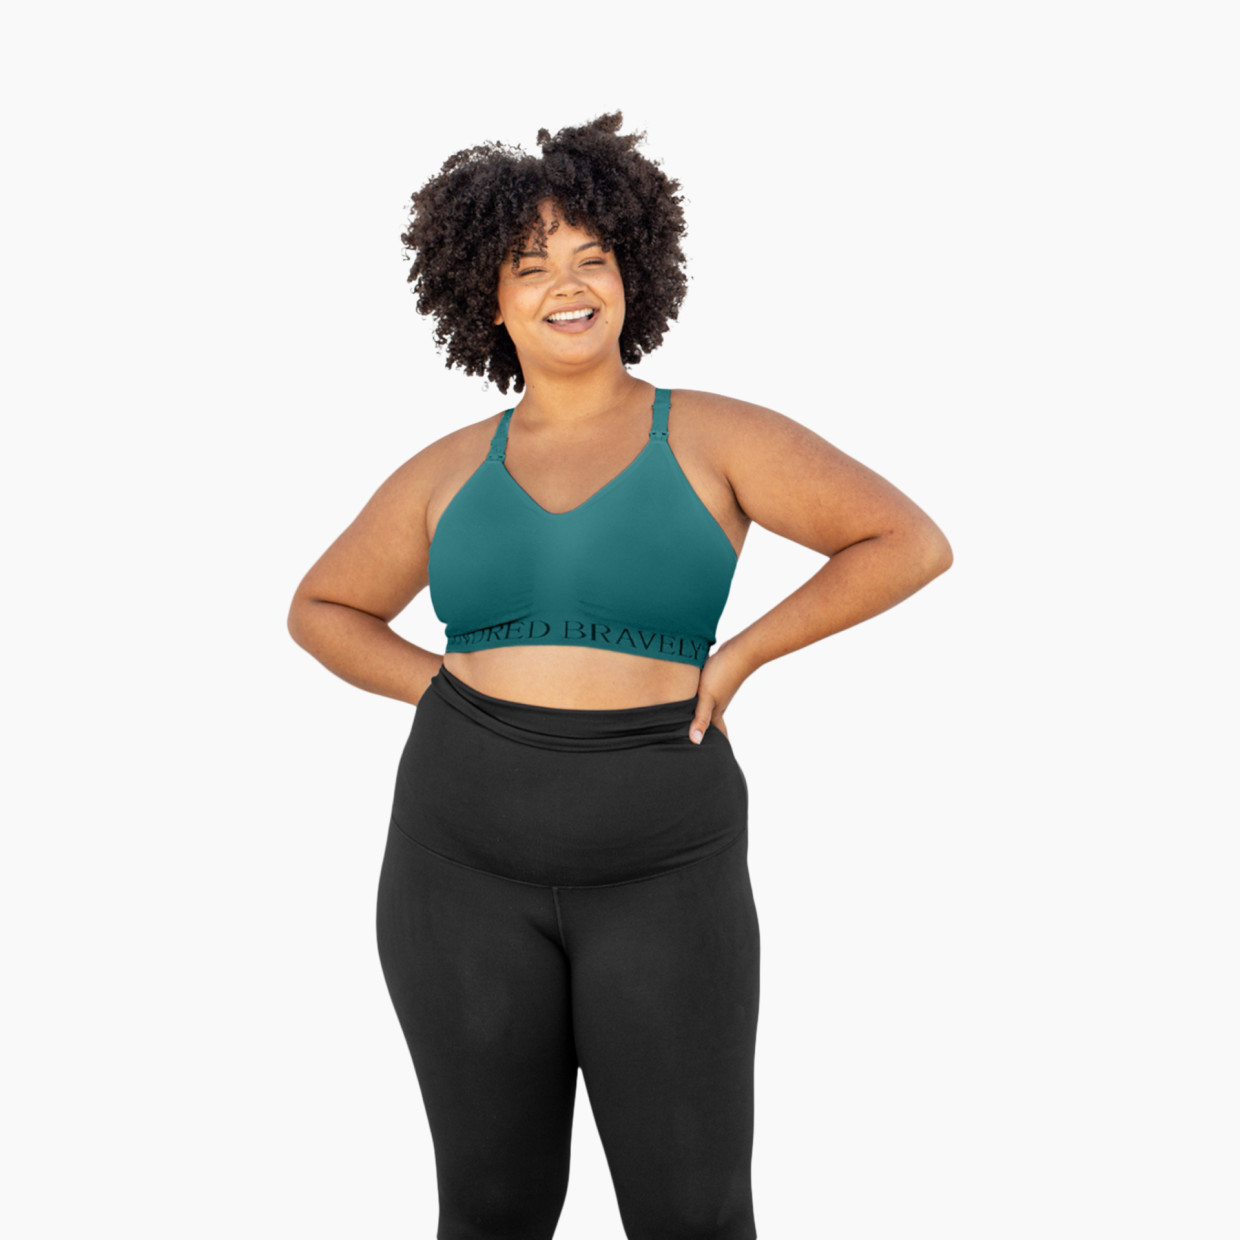 Kindred Bravely Sublime Hands-Free Pumping & Nursing Sports Bra - Teal, Xxl-Busty.